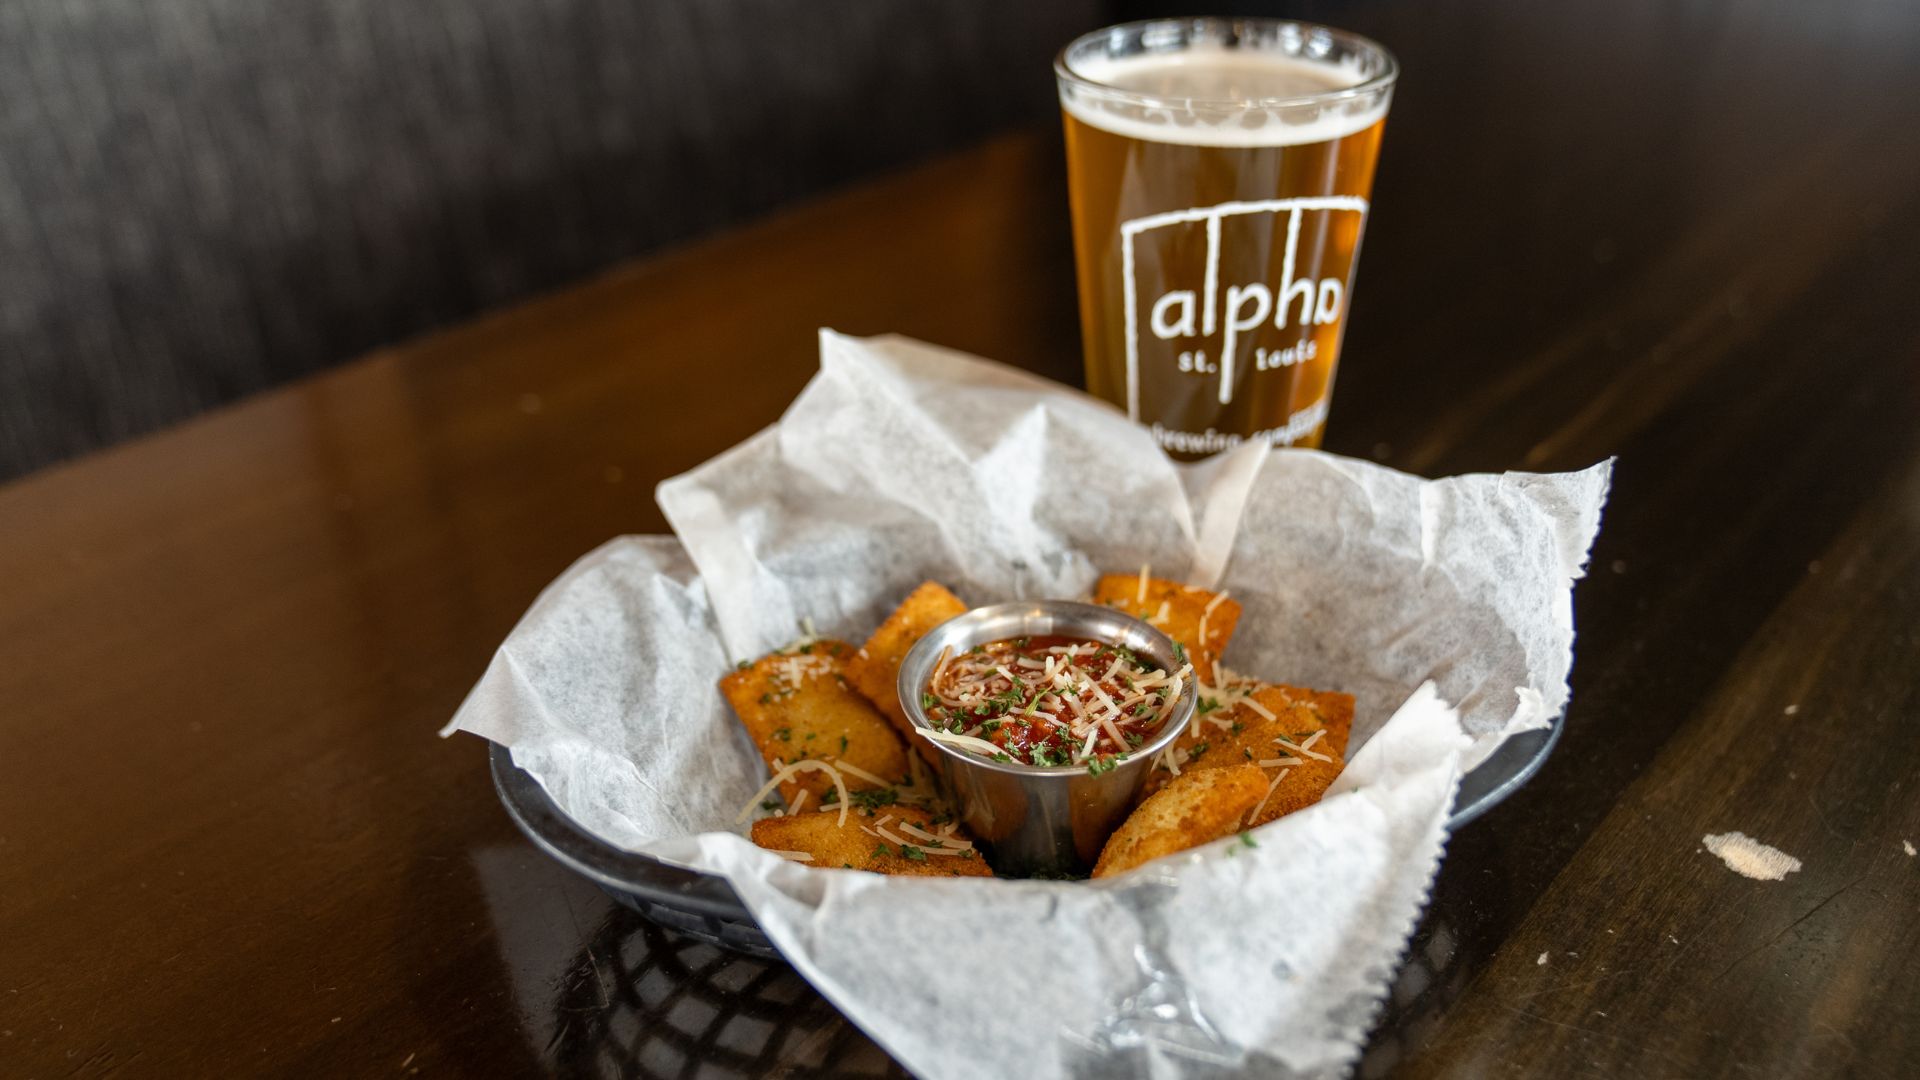 Alpha Brewing Company serves toasted ravioli alongside its sour beers.